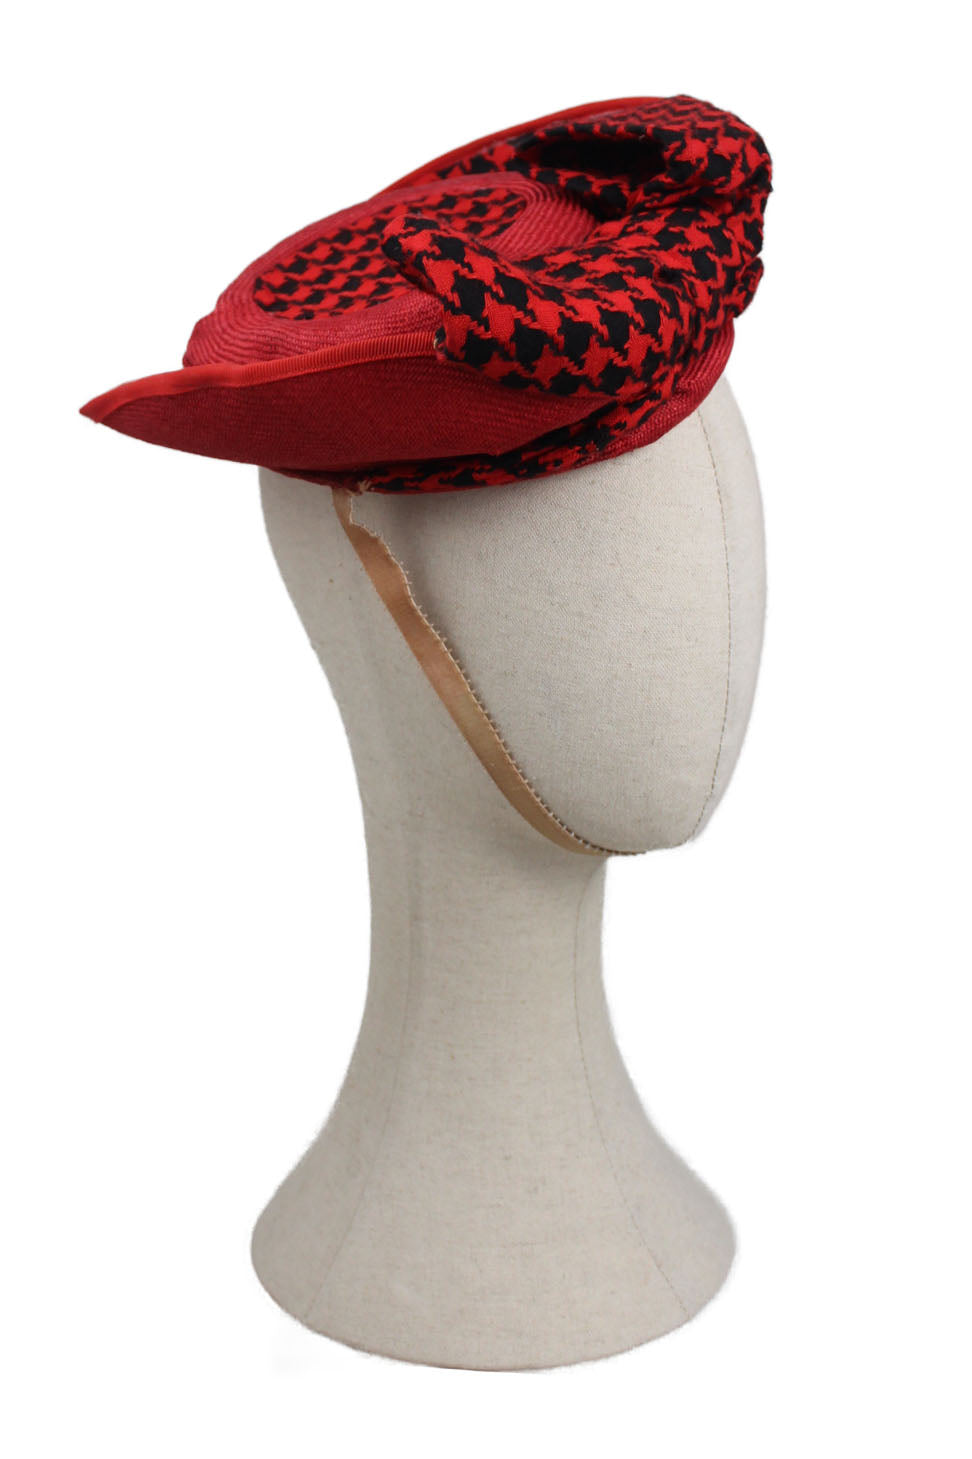 vintage rodney gordon red hat. features theatre piece with curved base and metal lining, 40's inspired design. houndstooth print and red knit. features beige ribbon for neck and plastic comb inside